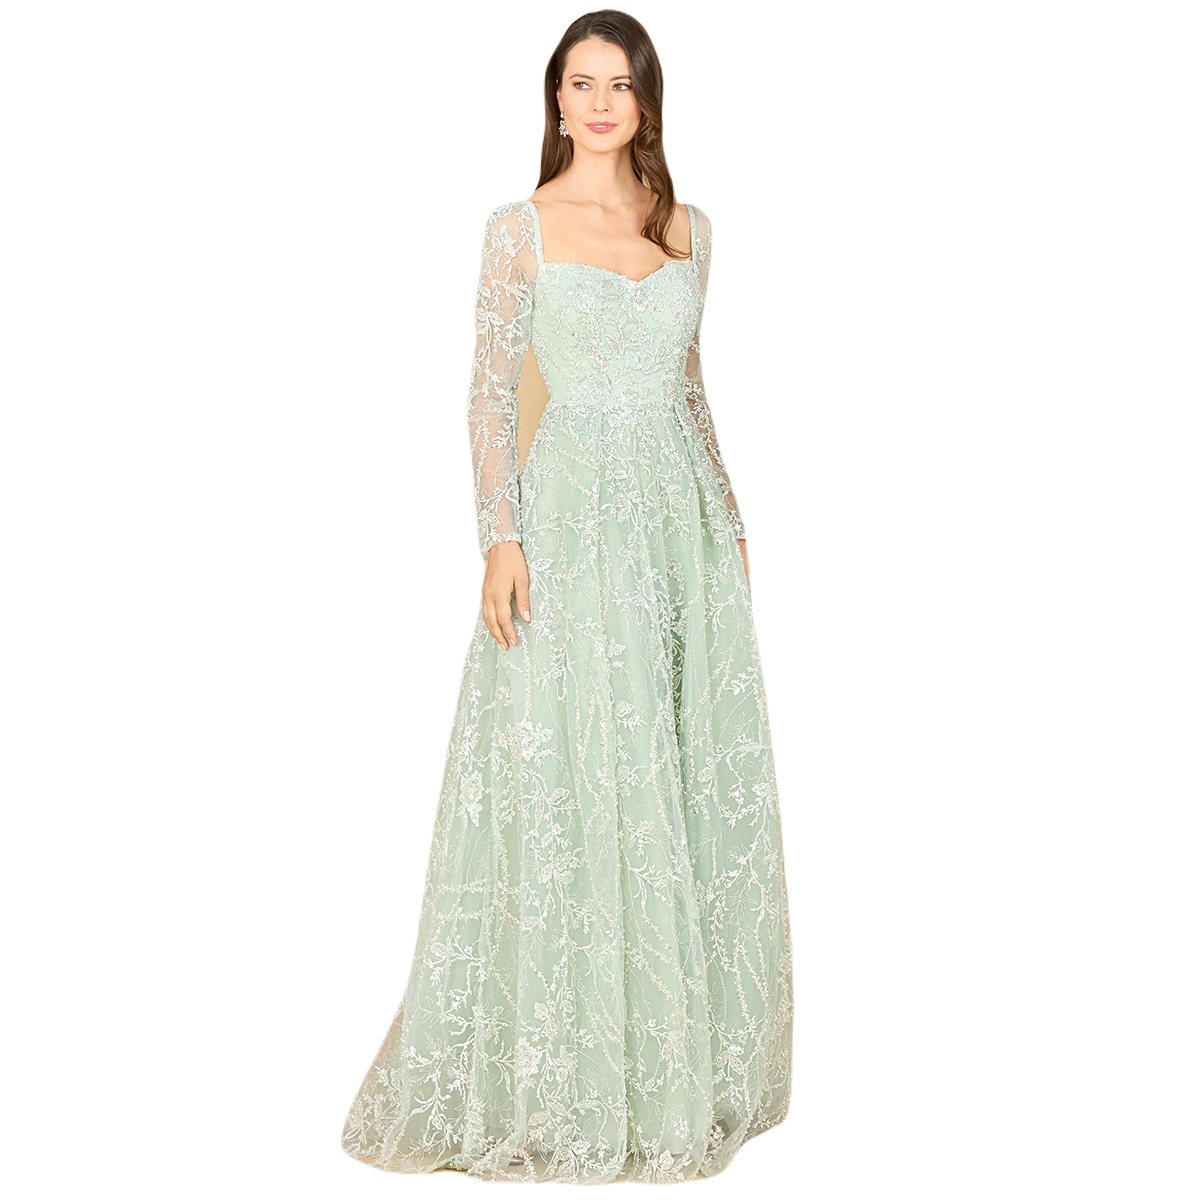 1940s Evening, Prom, Party, Formal, Ball Gowns Lara Womens Long Sleeve Beaded Lace Gown - Dusty sage $858.00 AT vintagedancer.com